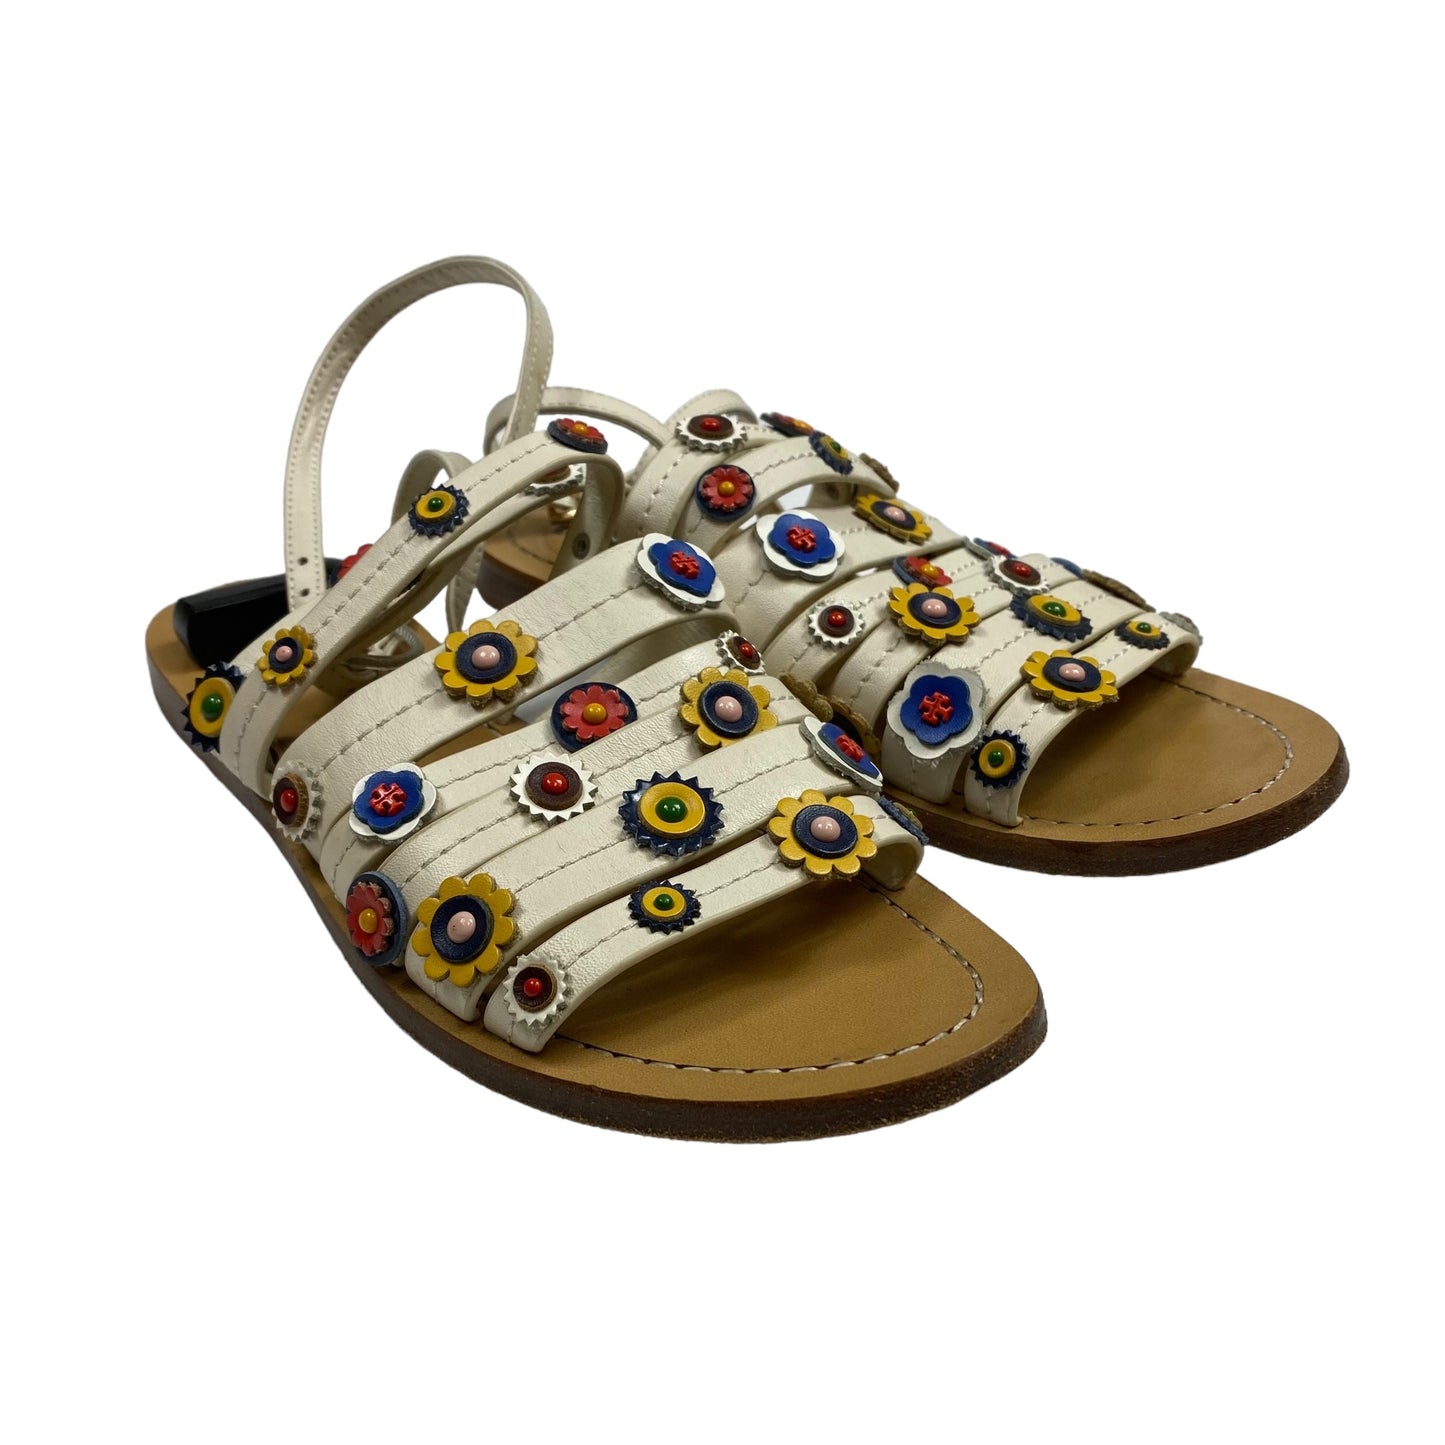 Sandals Designer By Tory Burch  Size: 5